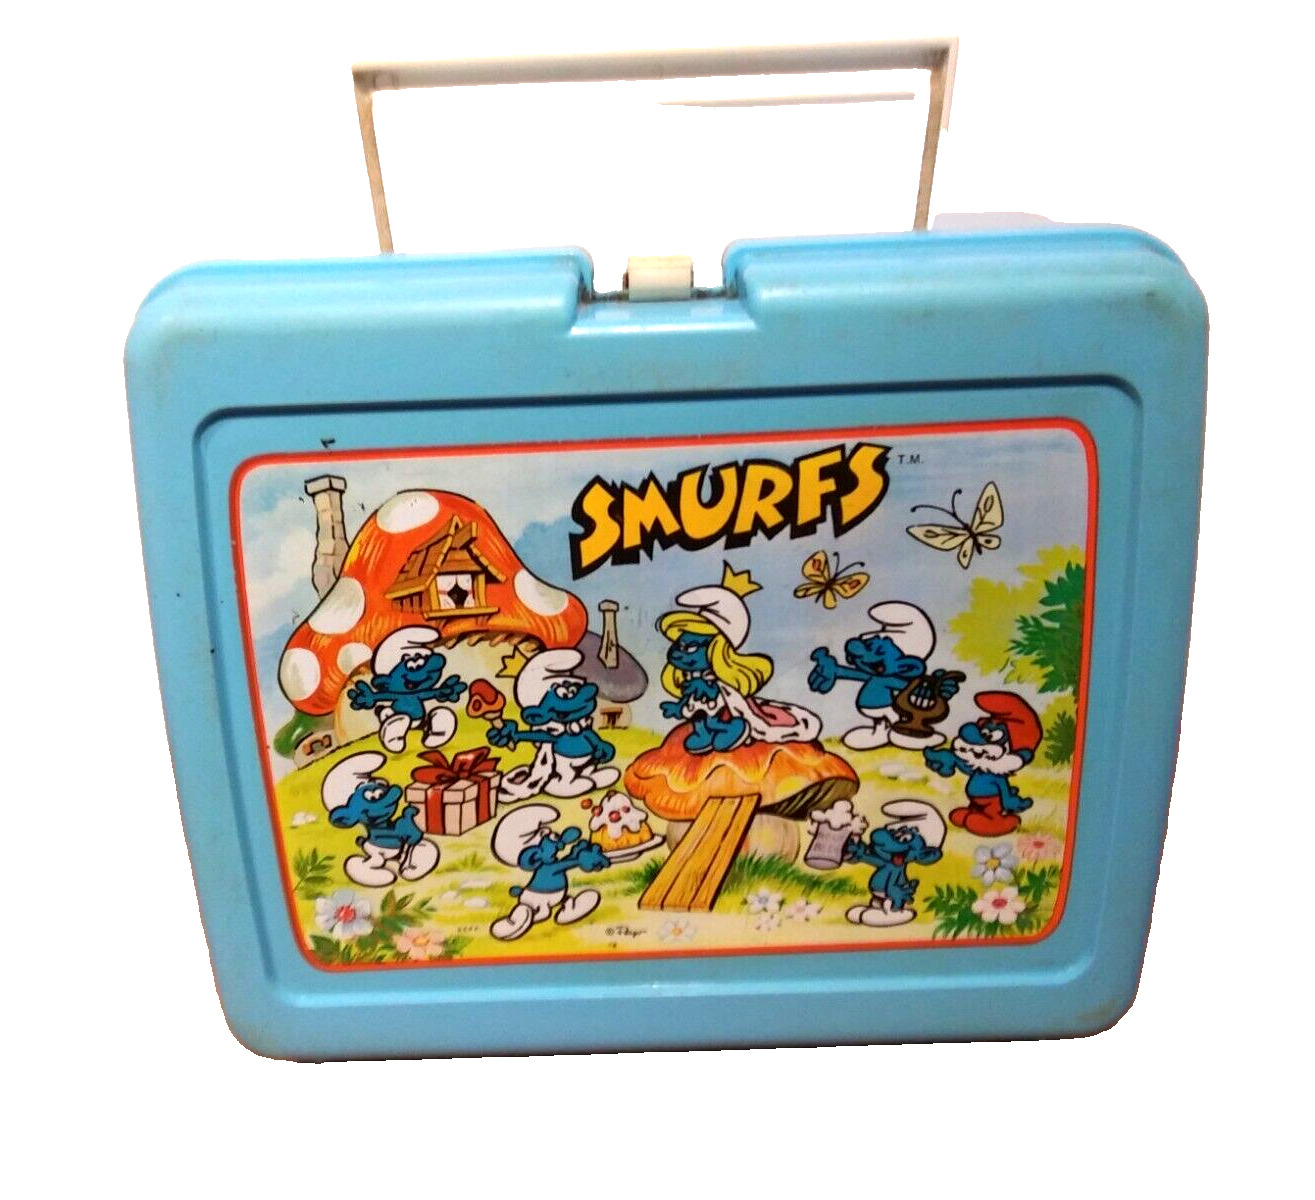 Vintage 1980s Smurfs Lunchbox No Thermos-Plastic-Great Graphics-Cartoon-USA Made